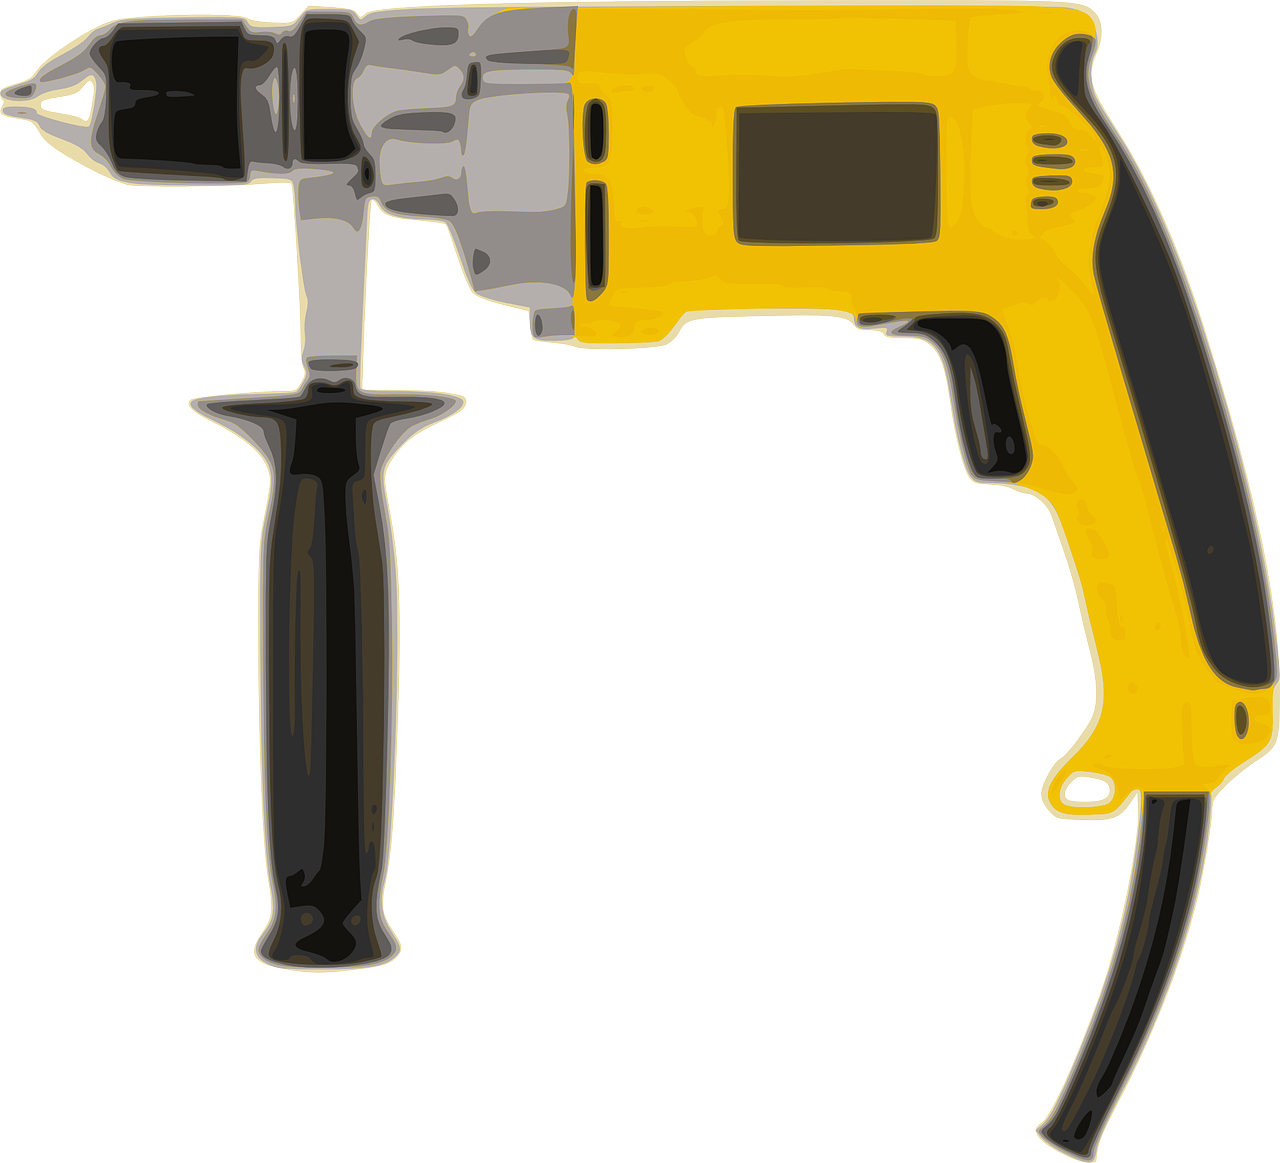 A Yellow And Black Drill